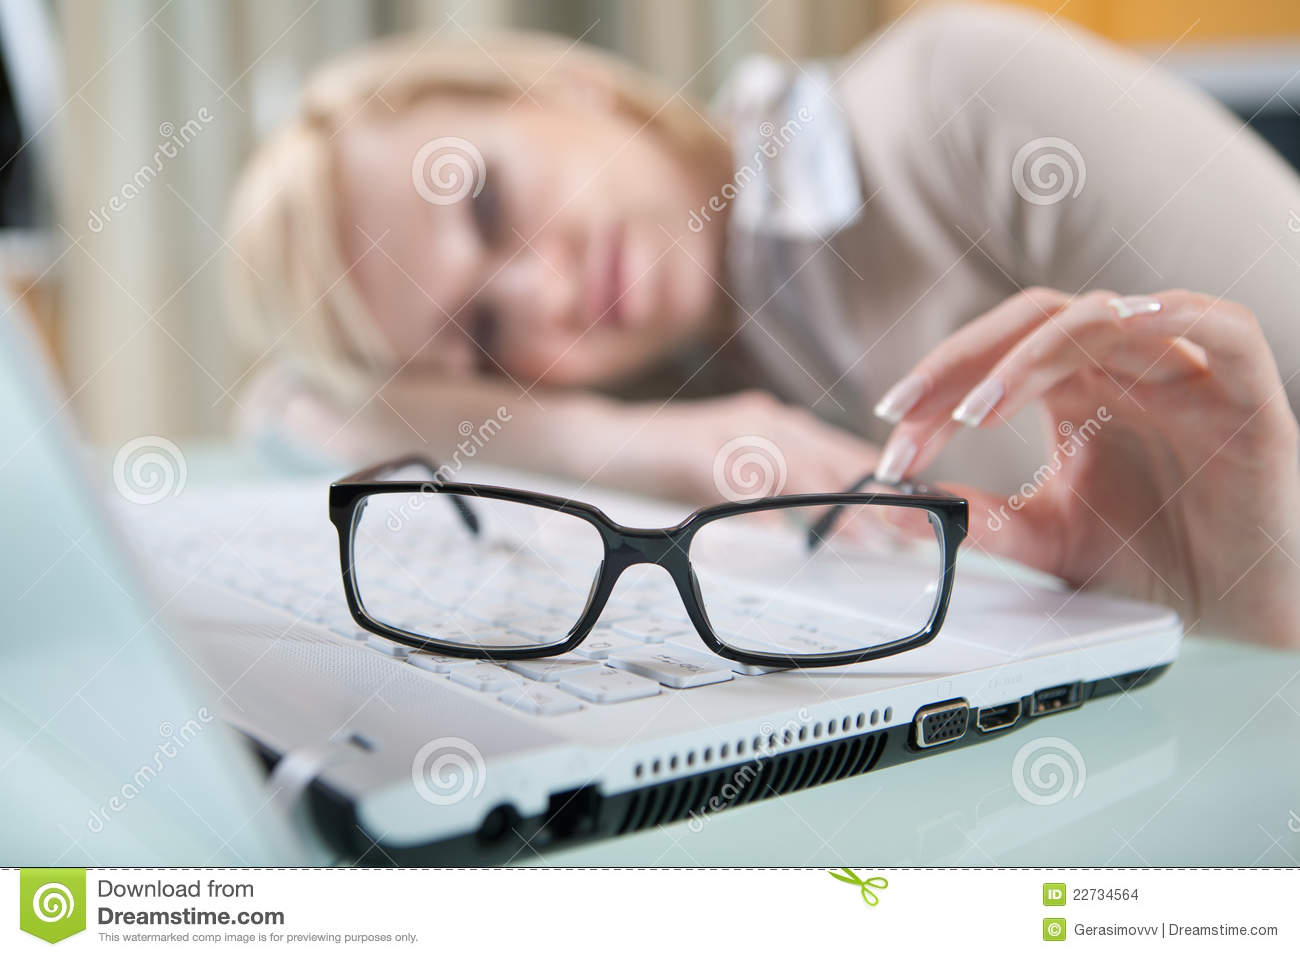 Eyes With Her Glasses Off Lying On The Table Next To Laptop Focused